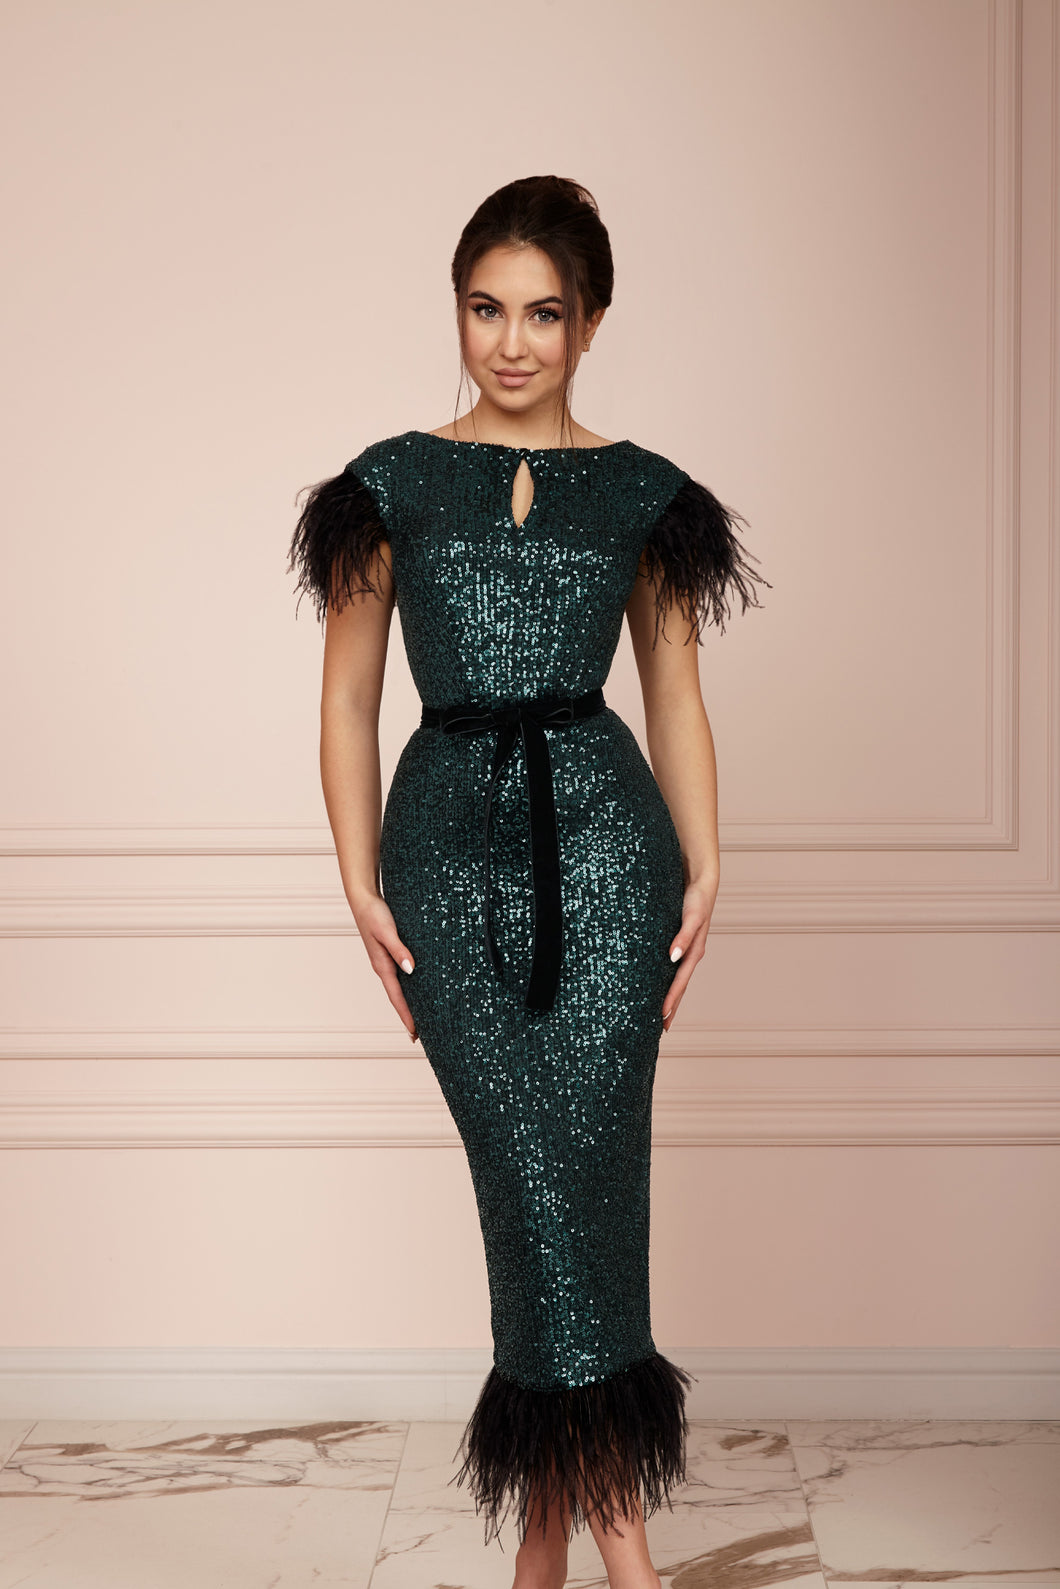 MALLINY ICON Emerald Green Sequin Midi Dress with Black Feathers